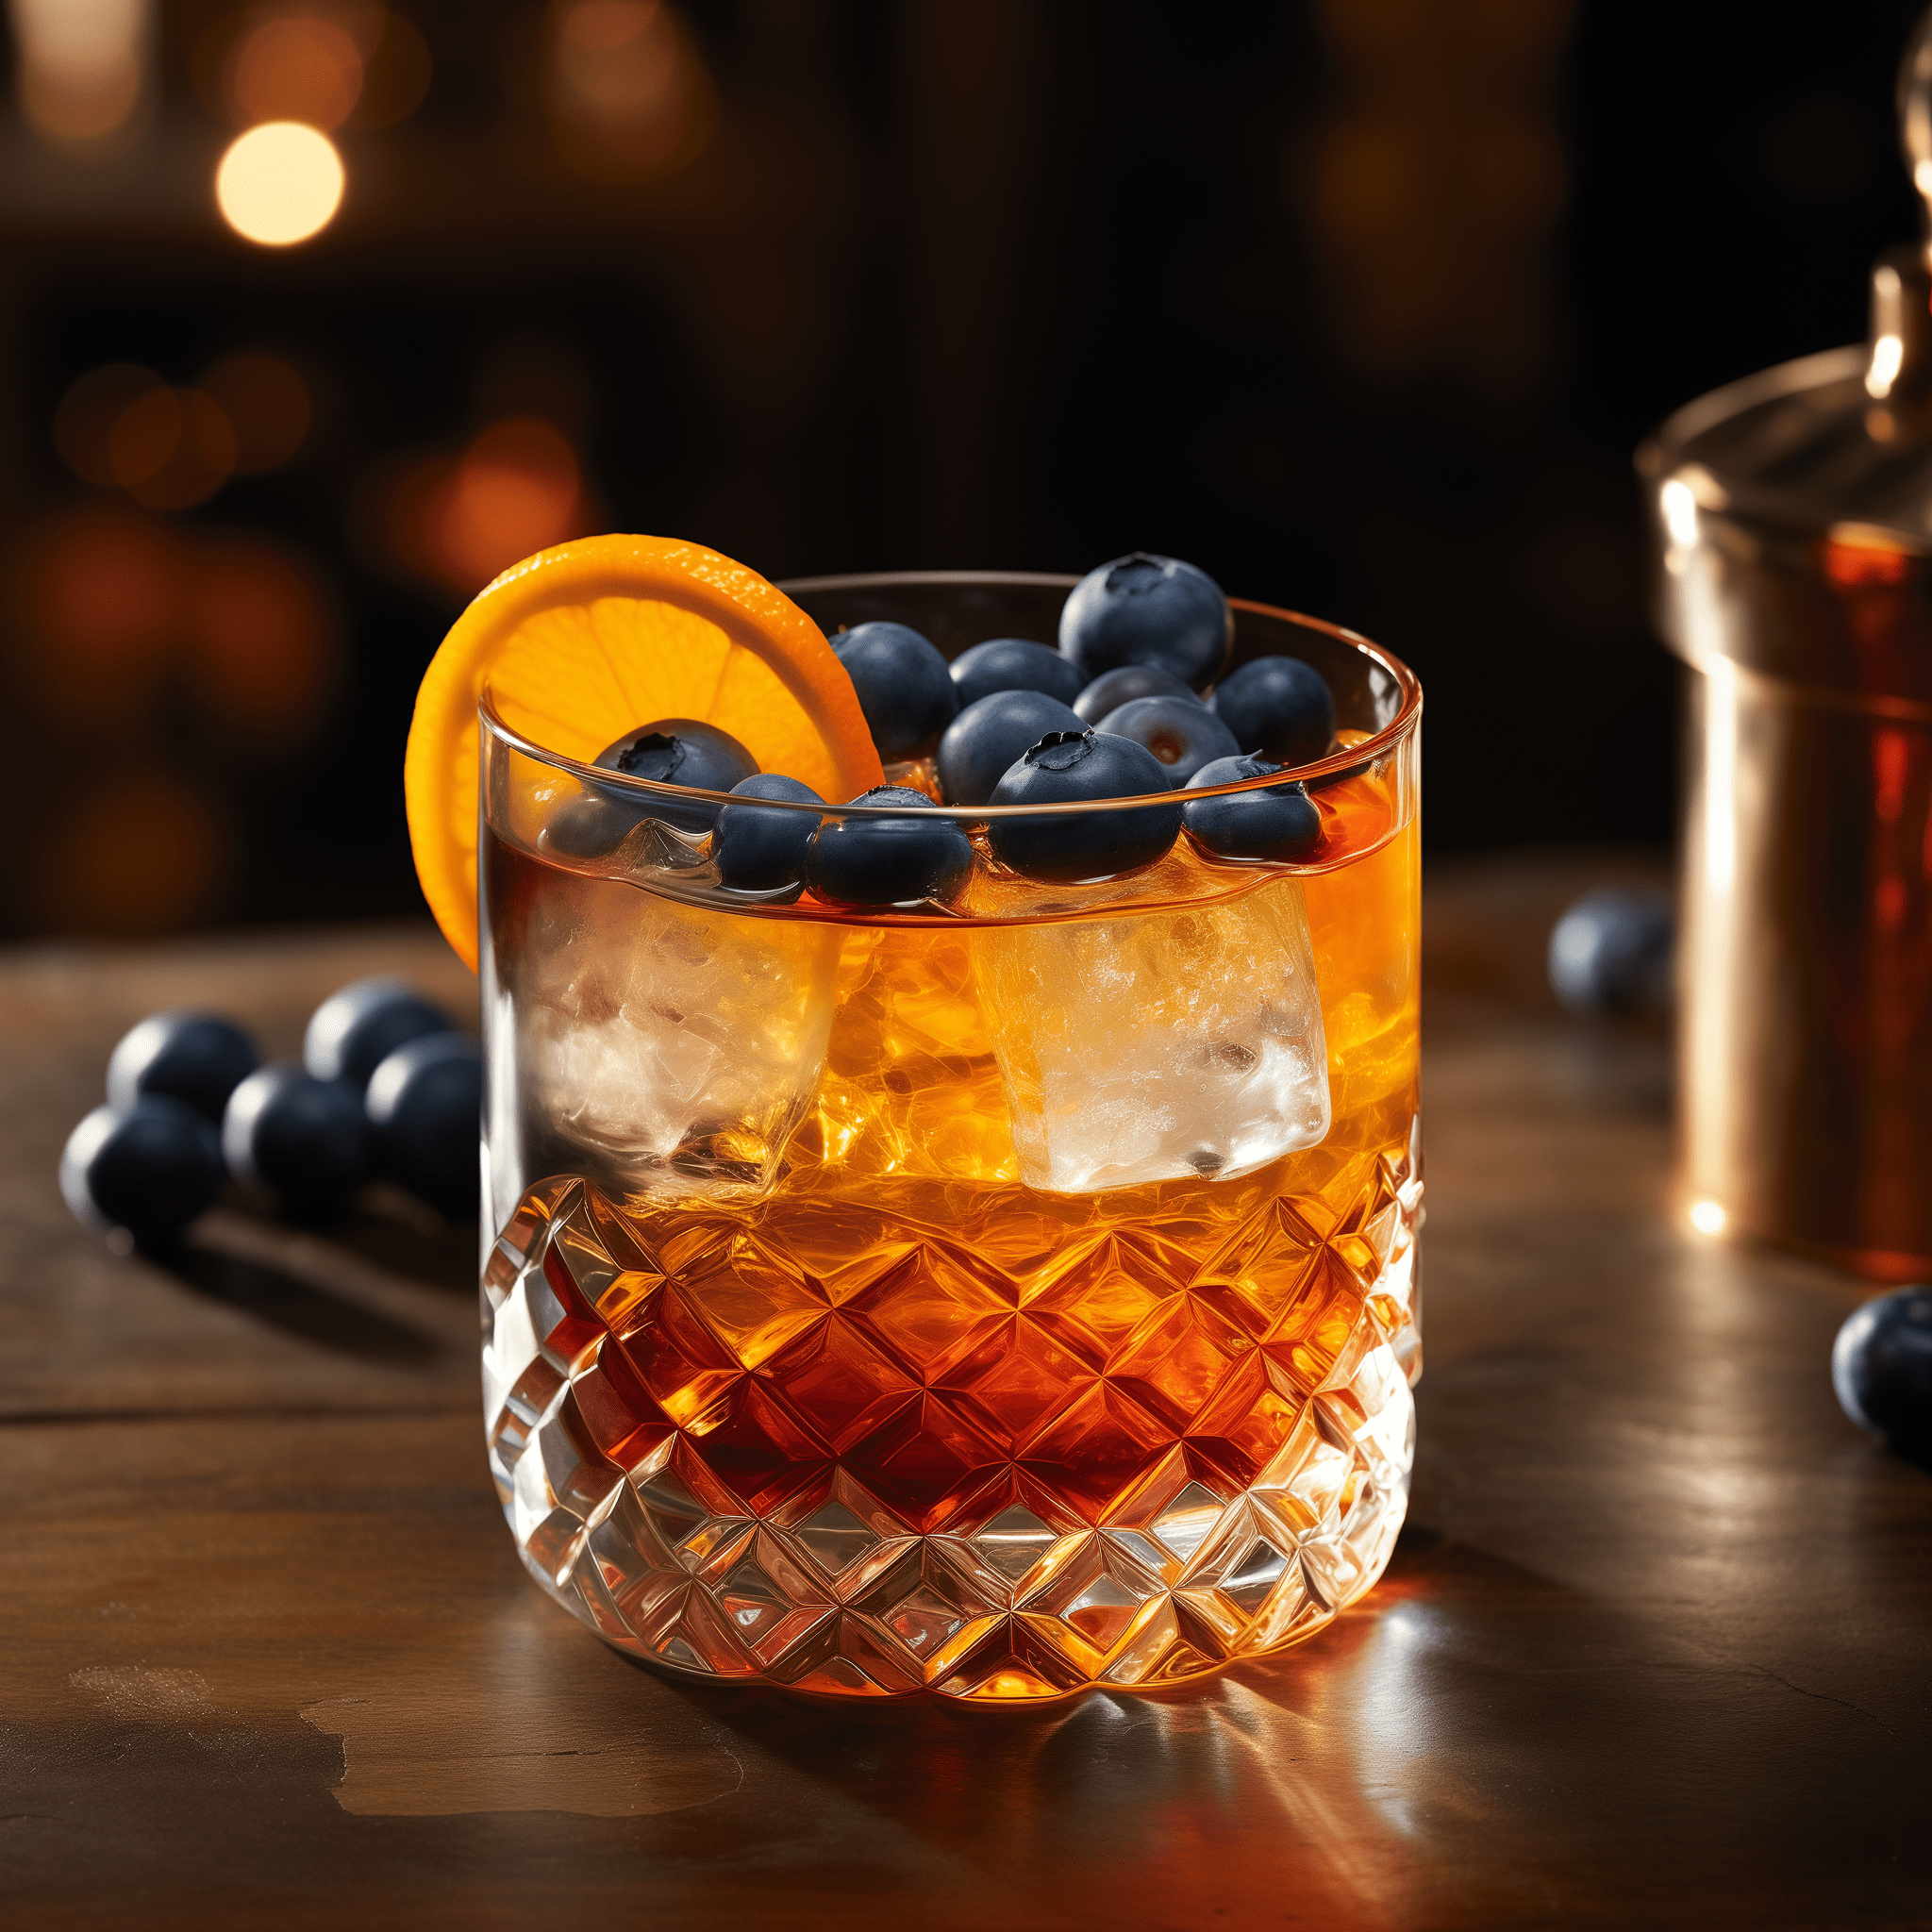 Blueberry Old Fashioned Cocktail Recipe - The Blueberry Old Fashioned has a rich and smooth taste with a balance of sweet and tart from the blueberries. The whiskey provides a warm, oaky backbone, while the bitters add complexity. It's a robust cocktail with a refreshing fruity finish.